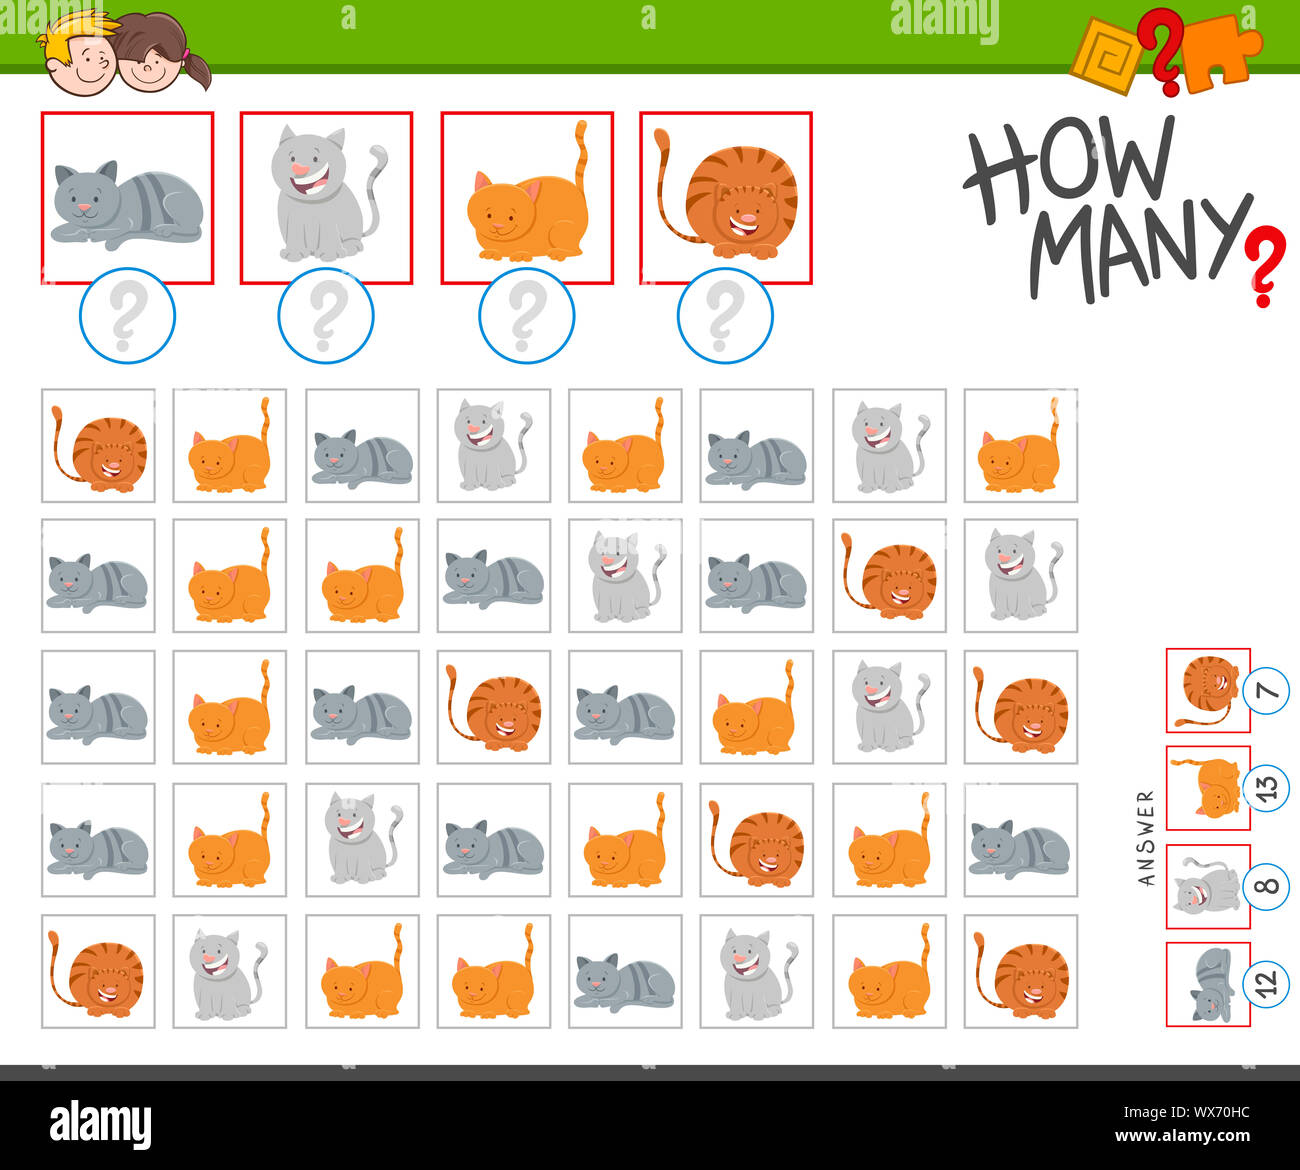 how many cats counting game for kids Stock Photo